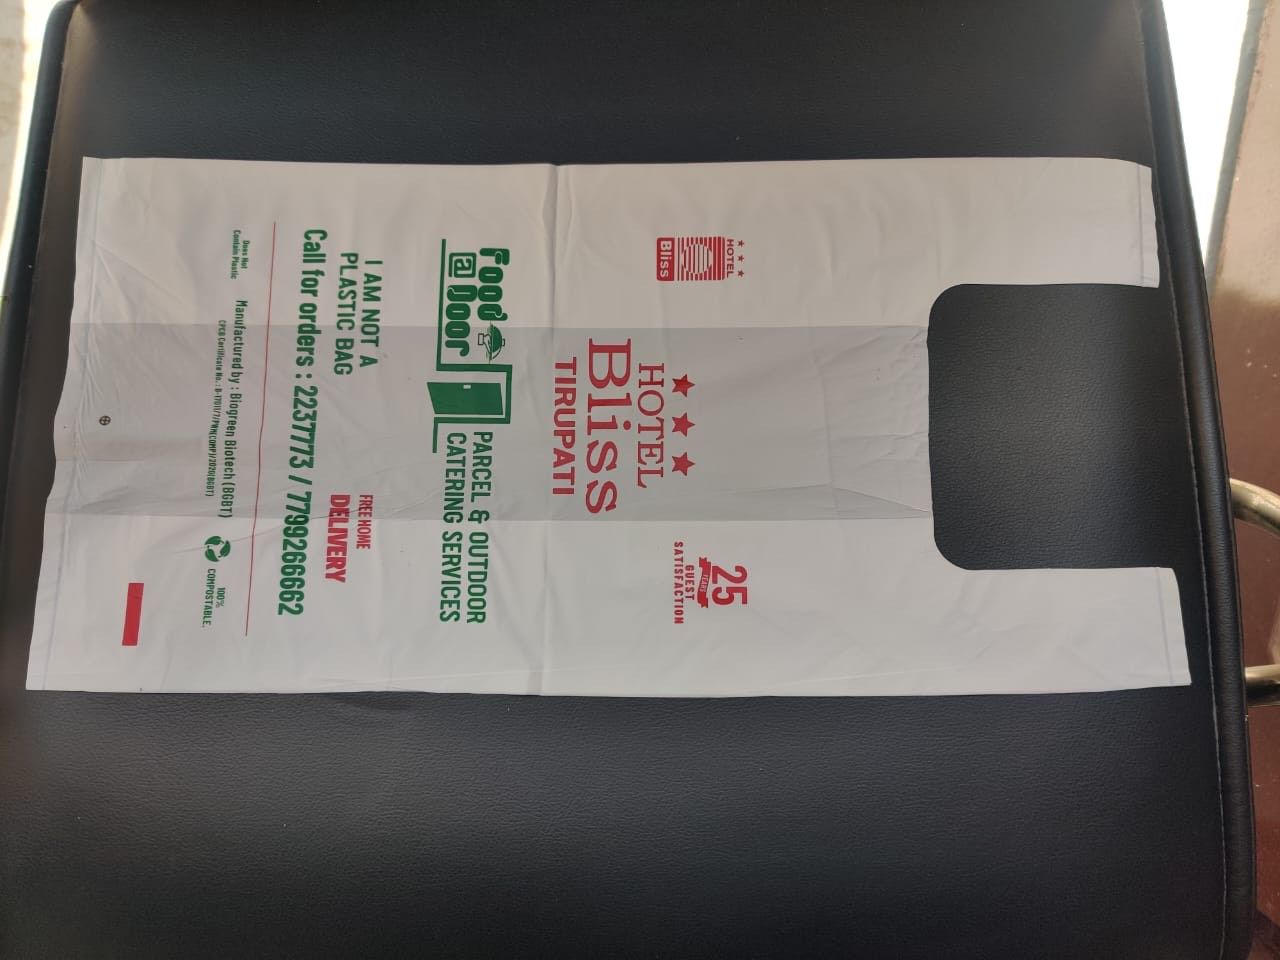 100% Biodegradable (Compostable) Carry Bag 17*23 in Vadodara at best price  by Compostable Biodegradable Bags &75 Microns Plastic Bags - Justdial